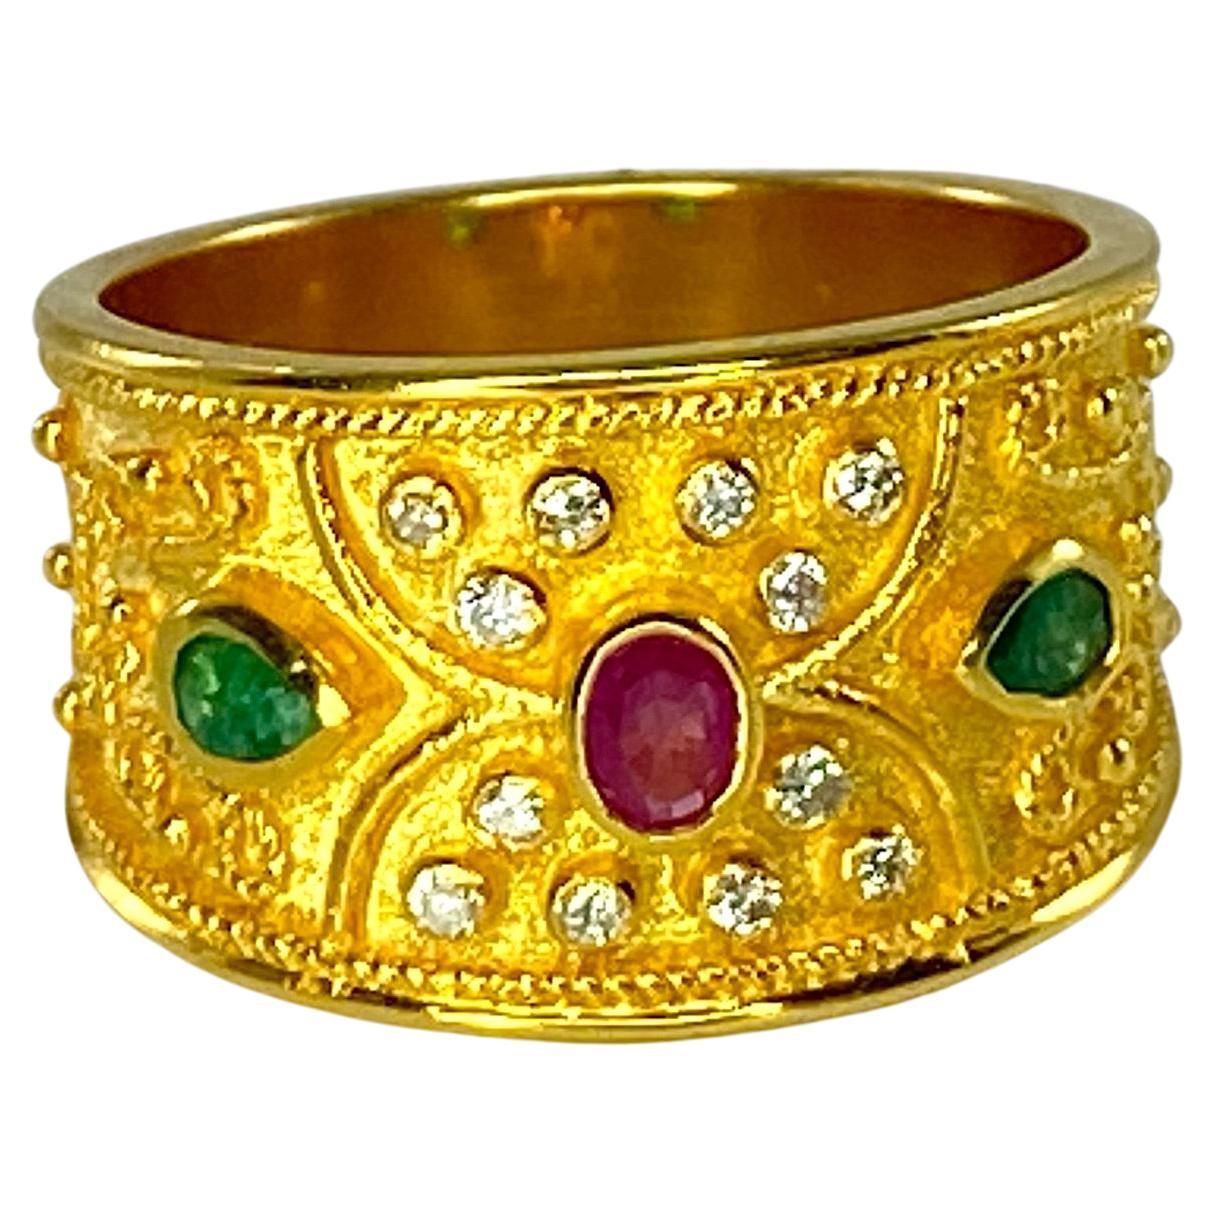 Presenting S.Georgios designer 18 Karat Solid Yellow Gold Ring all handmade in Byzantine Style workmanship with a unique velvet background and intricate granulation with a lot of detail. This ring features 0.12 Carat oval cut Ruby in the center